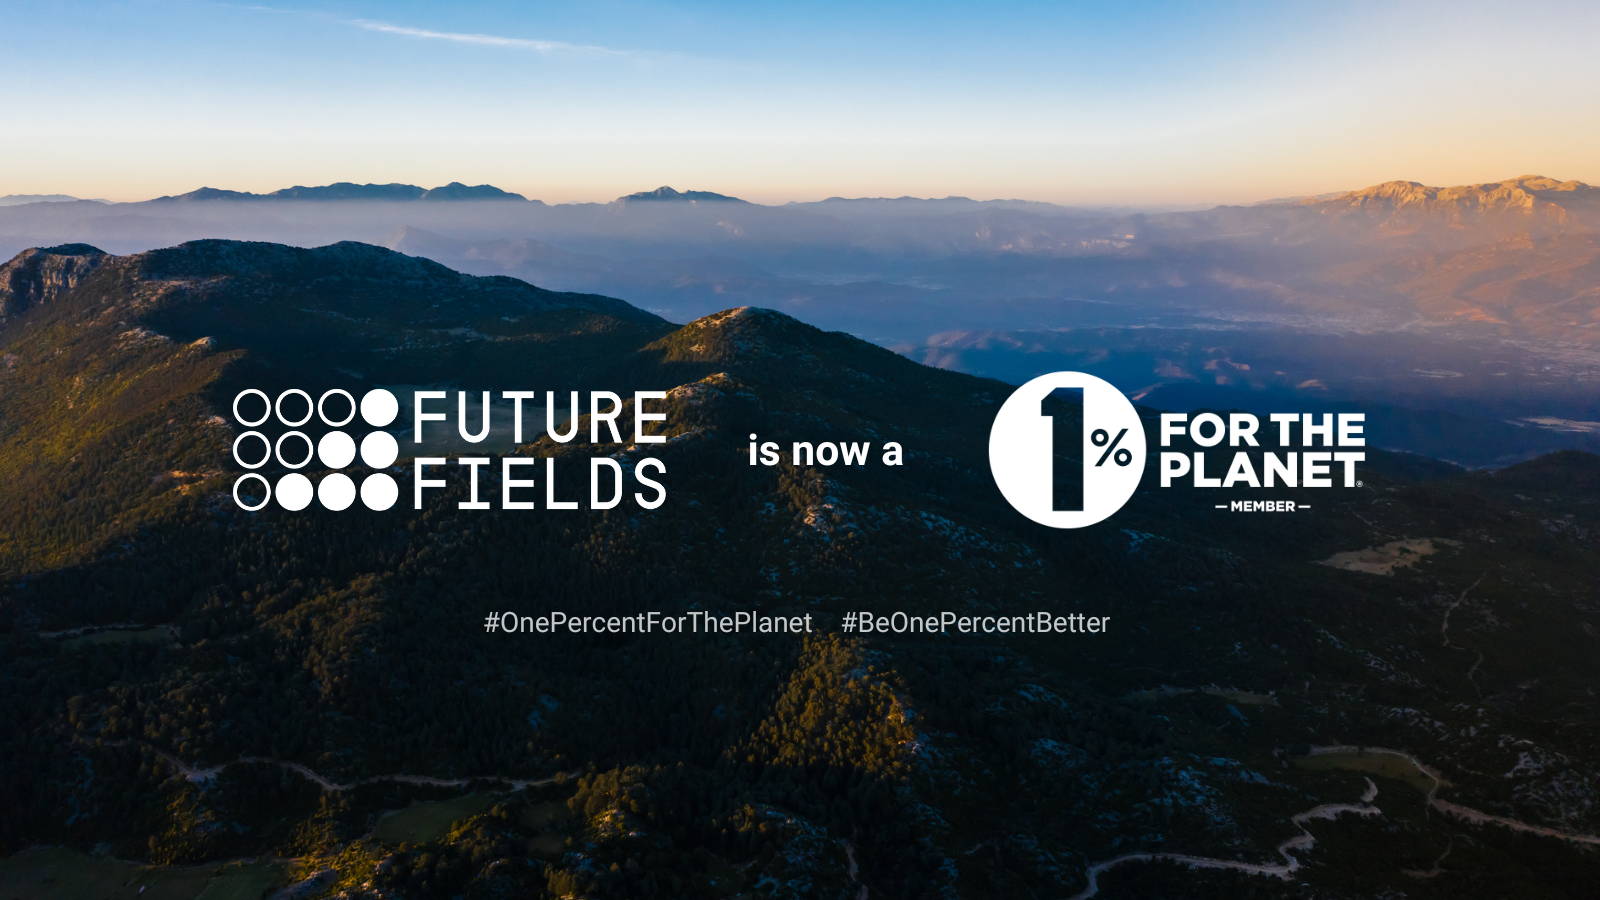 Aerial view of a mountain range in the clouds. White text overlay reads “Future Fields is now a 1% for the Planet member.”